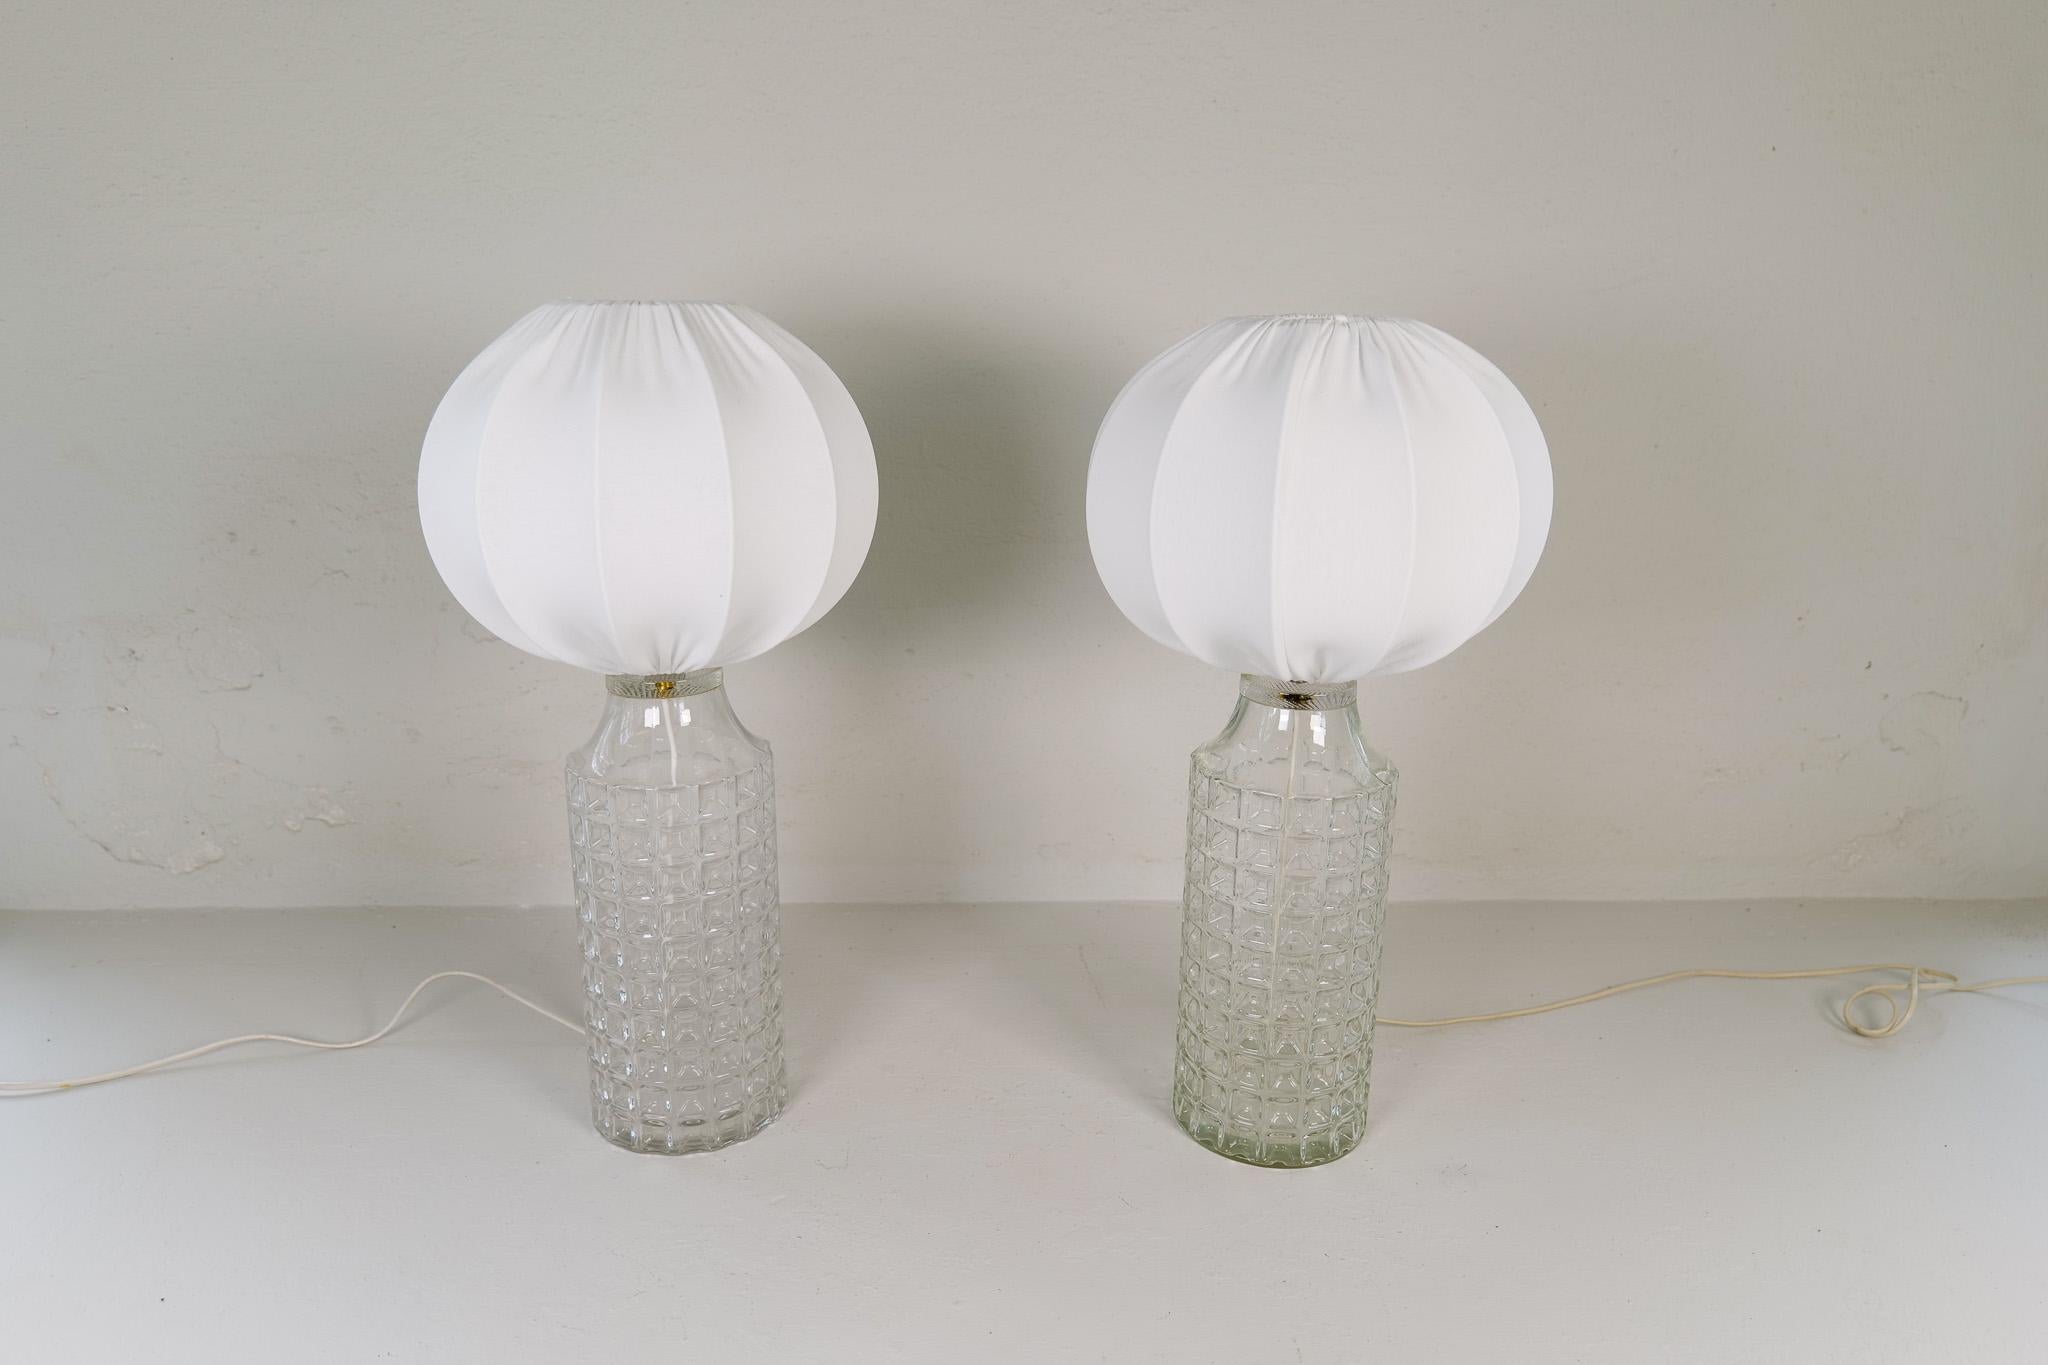 Swedish Mid-Century Modern Large Glass Table Lamps Orrefors, Sweden, 1970s For Sale